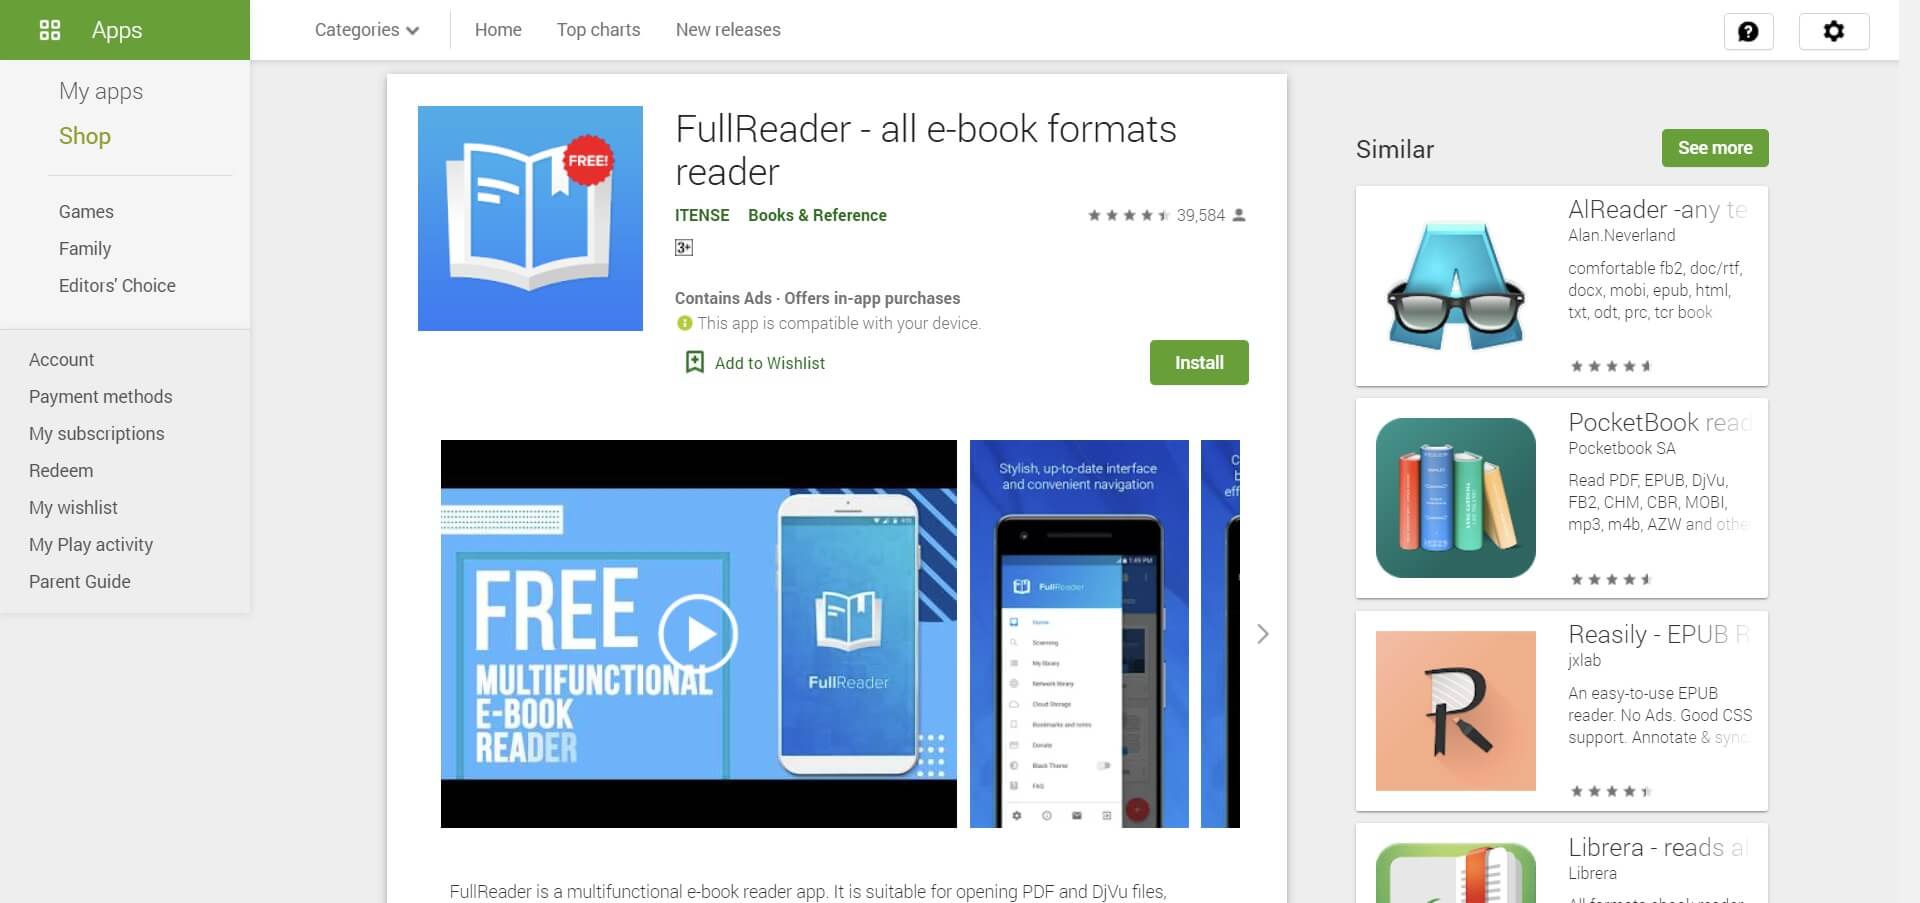 best book reading apps, best free book reading apps, best apps to read books, best apps to read books for free, best apps for reading book summaries, best apps to read books offline, best audio-book reading apps, best book reader apps for Android